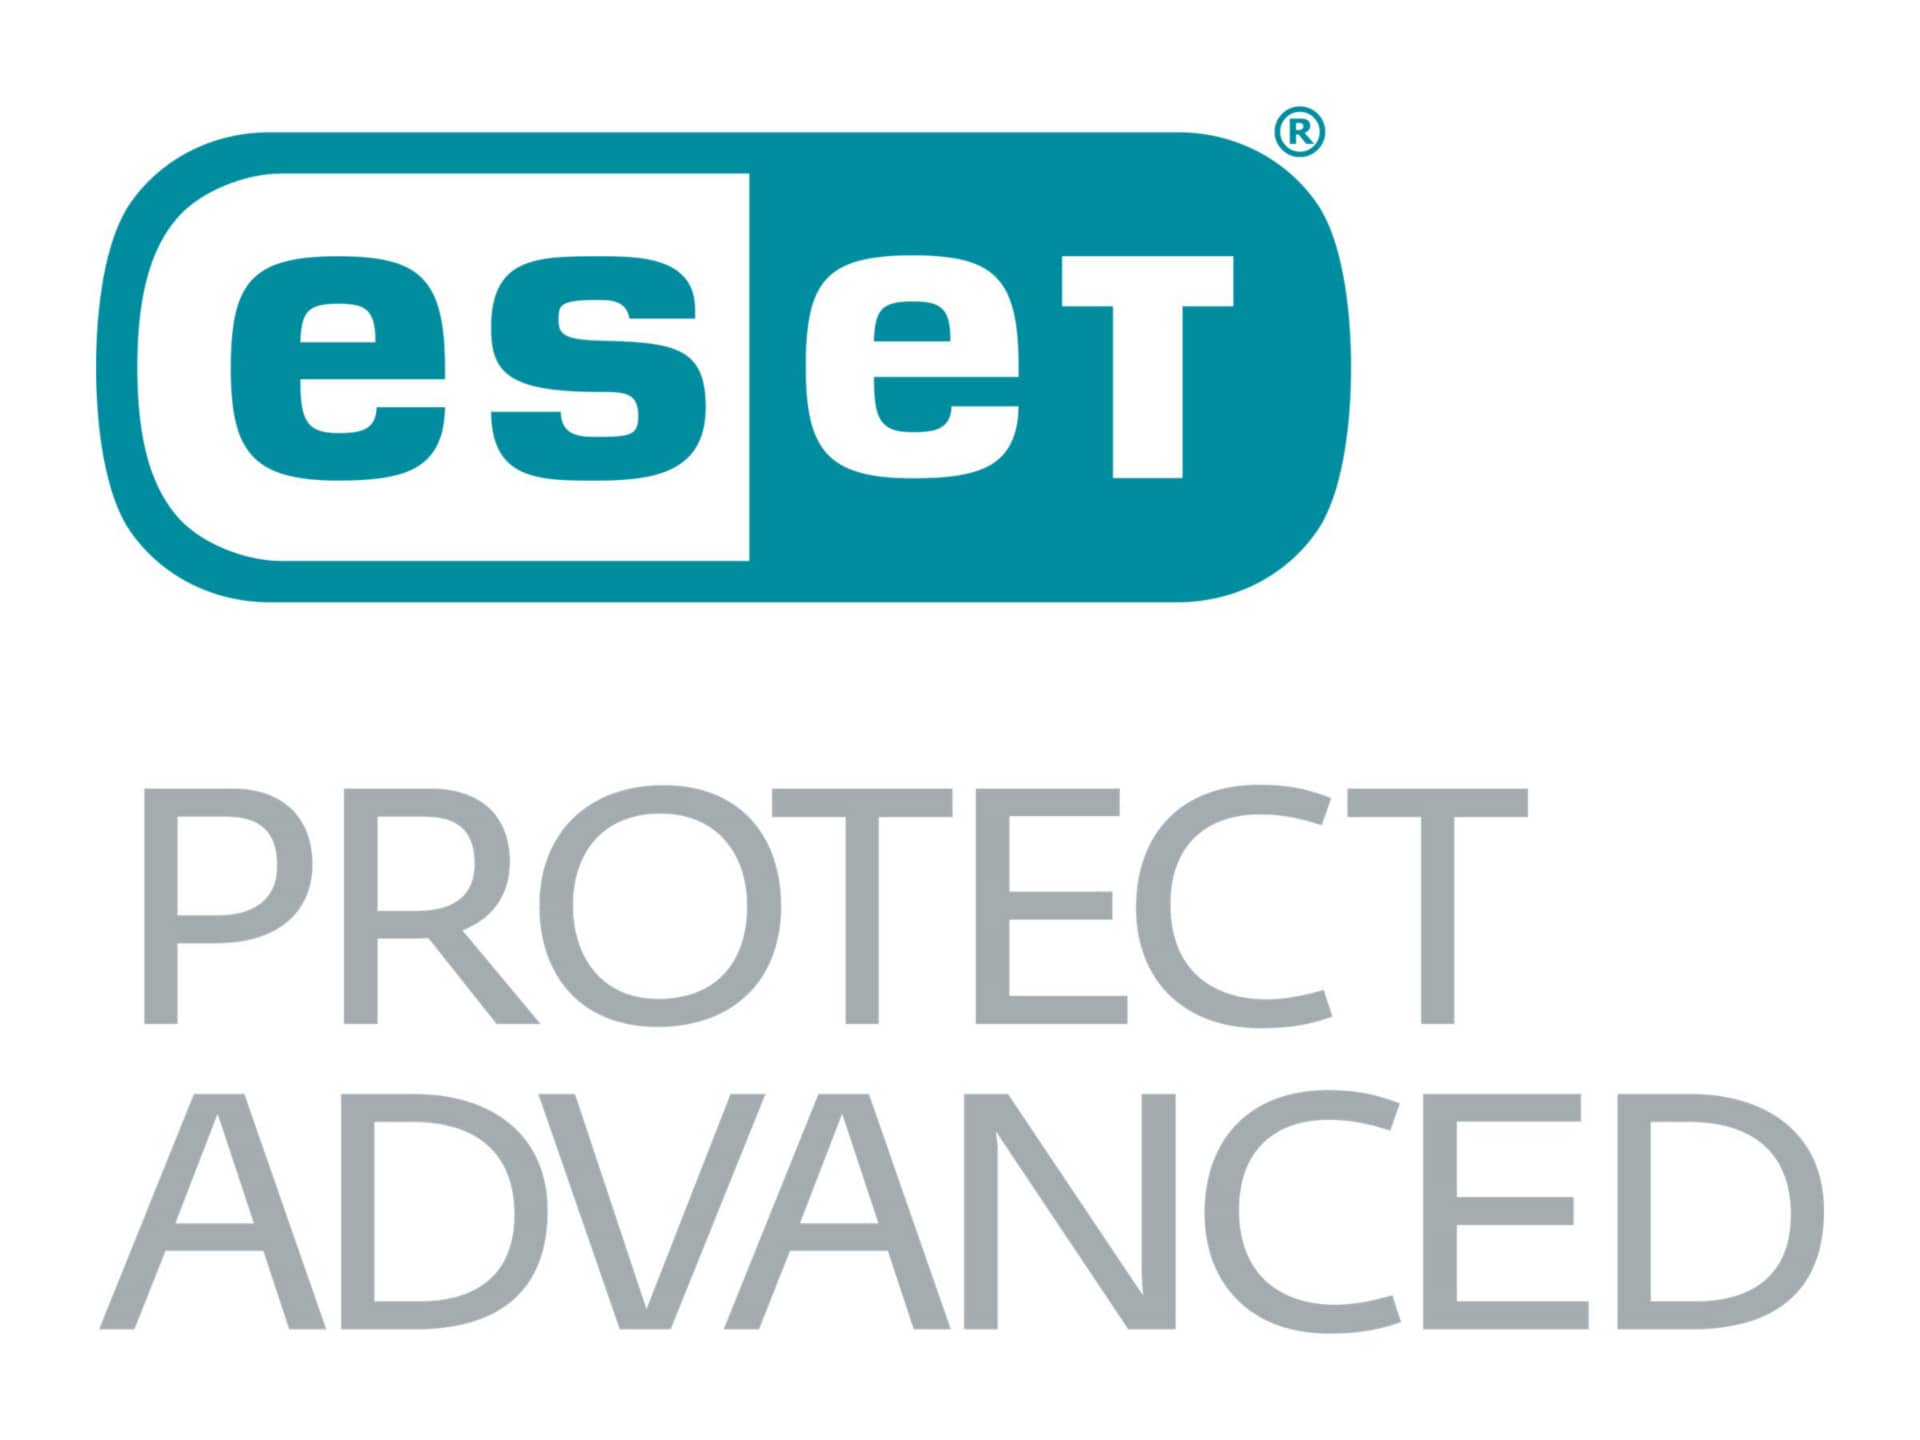 ESET PROTECT Advanced - subscription license enlargement (1 year) - 1 device